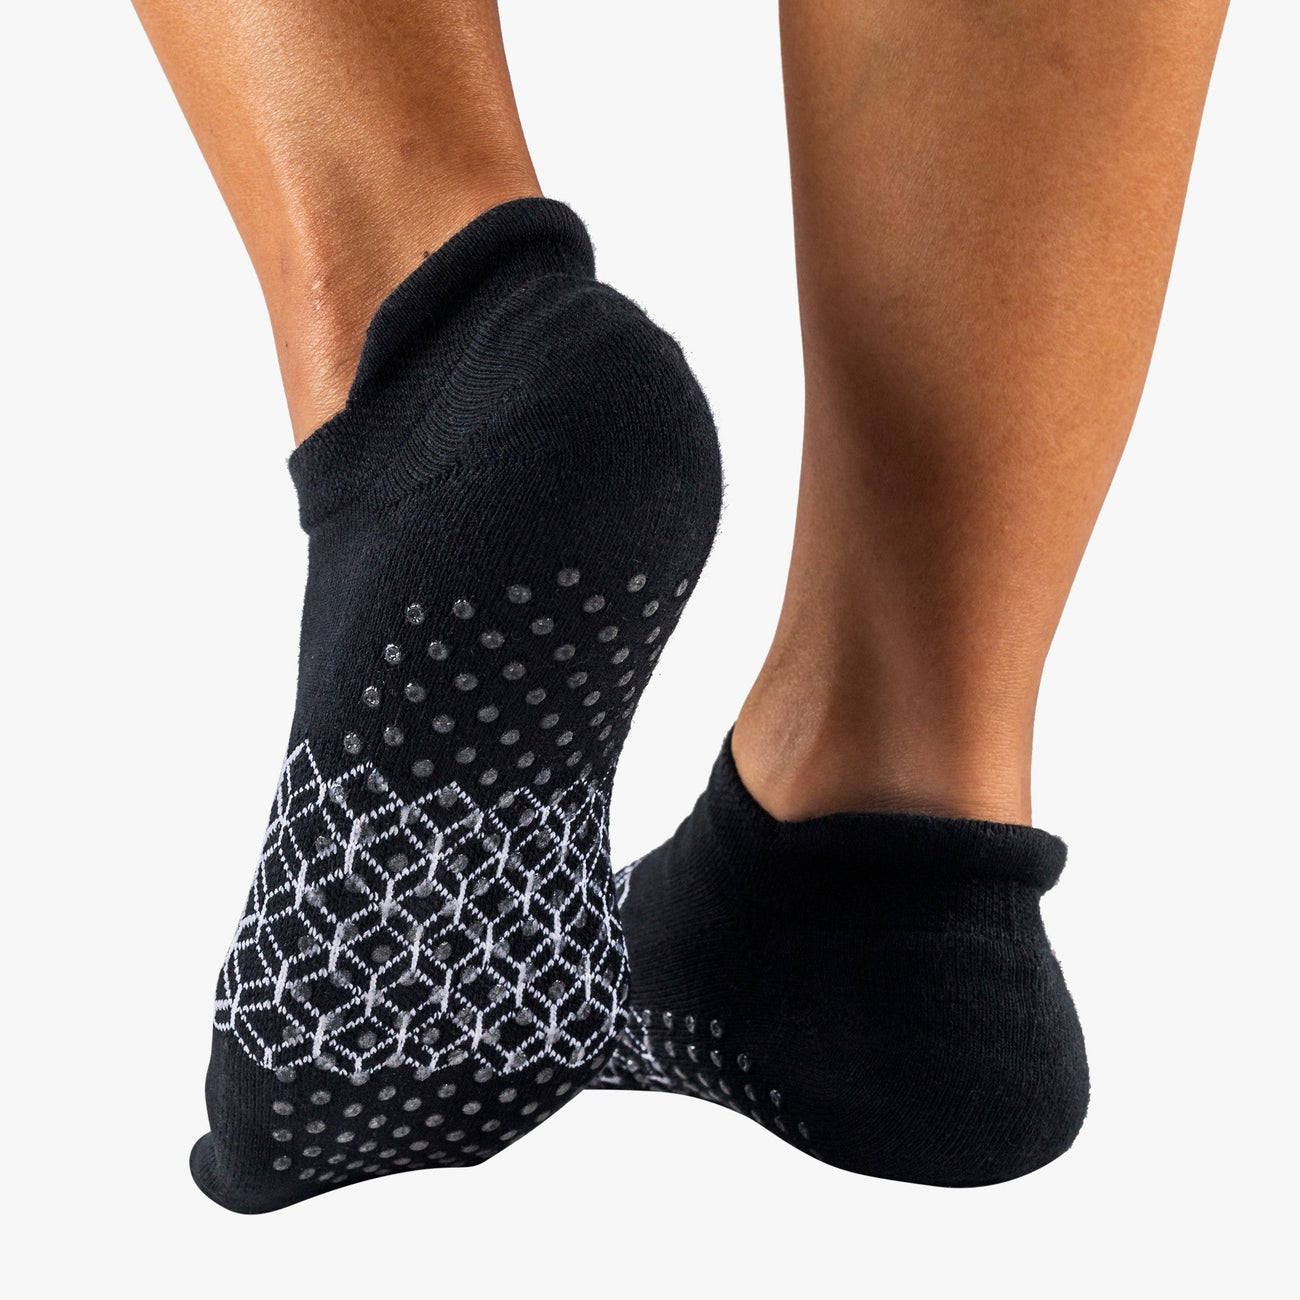 yoga socks uk | silicone grippers | organic cotton | black | by hipSwan